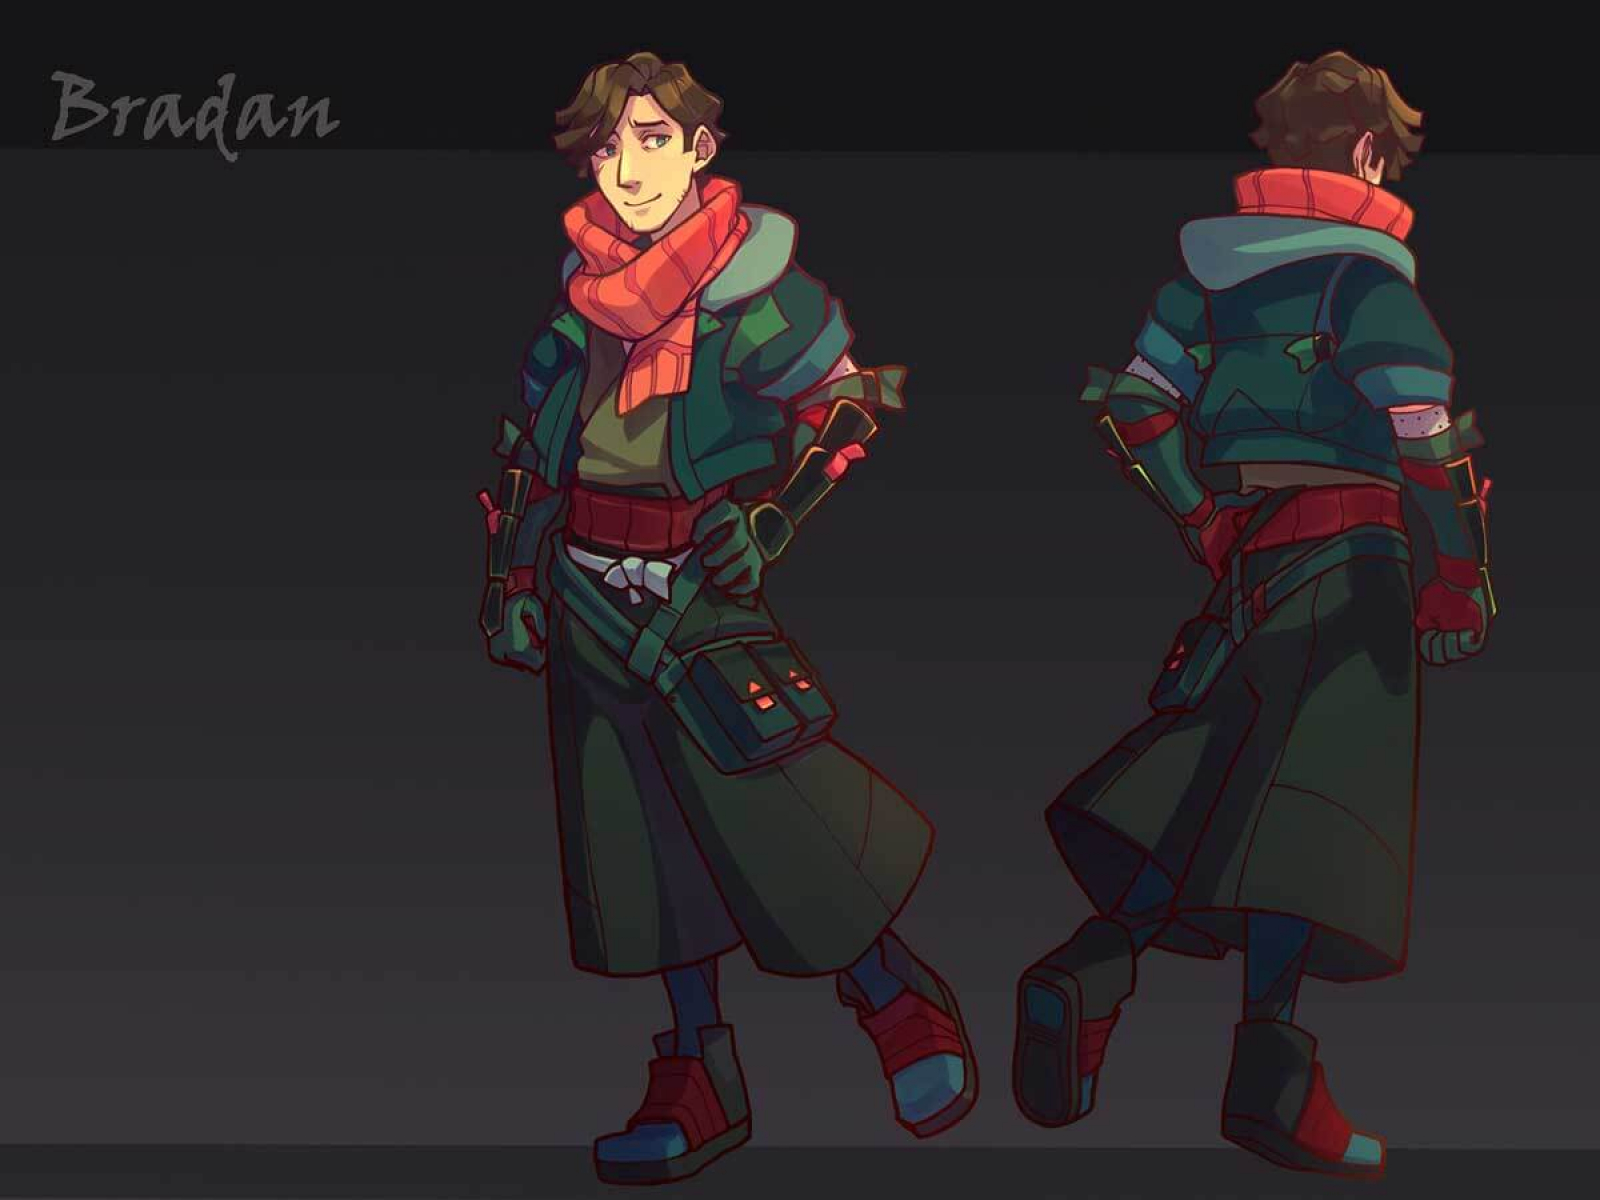 Art for Bradan, a male character with arm covering and a red scarf.